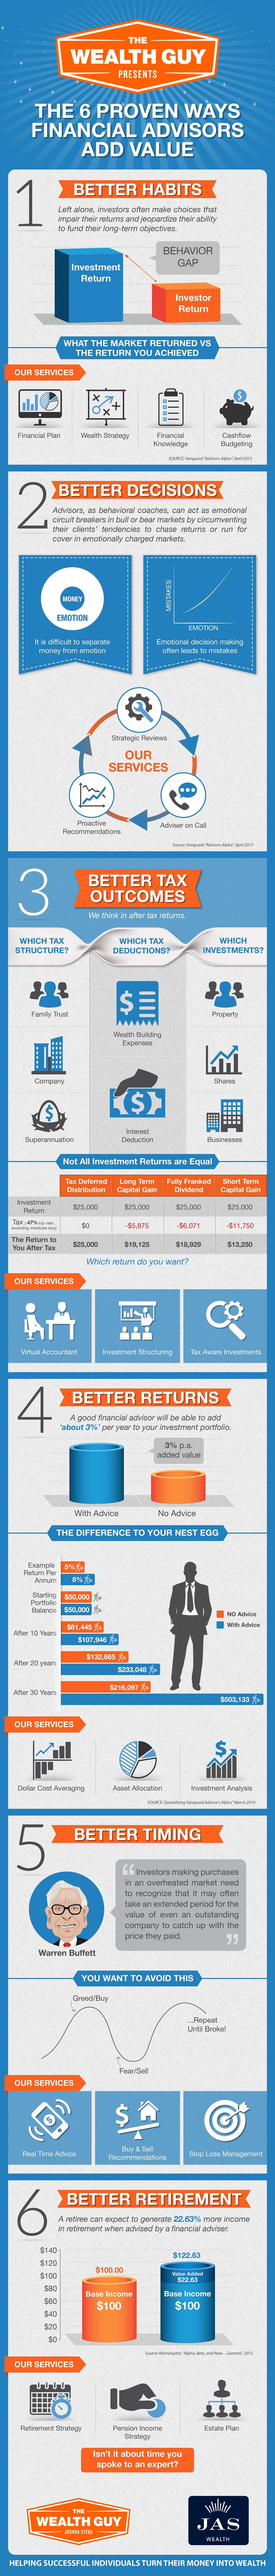 The 6 Proven Ways Financial Advisers Add Value Infographic #infographic